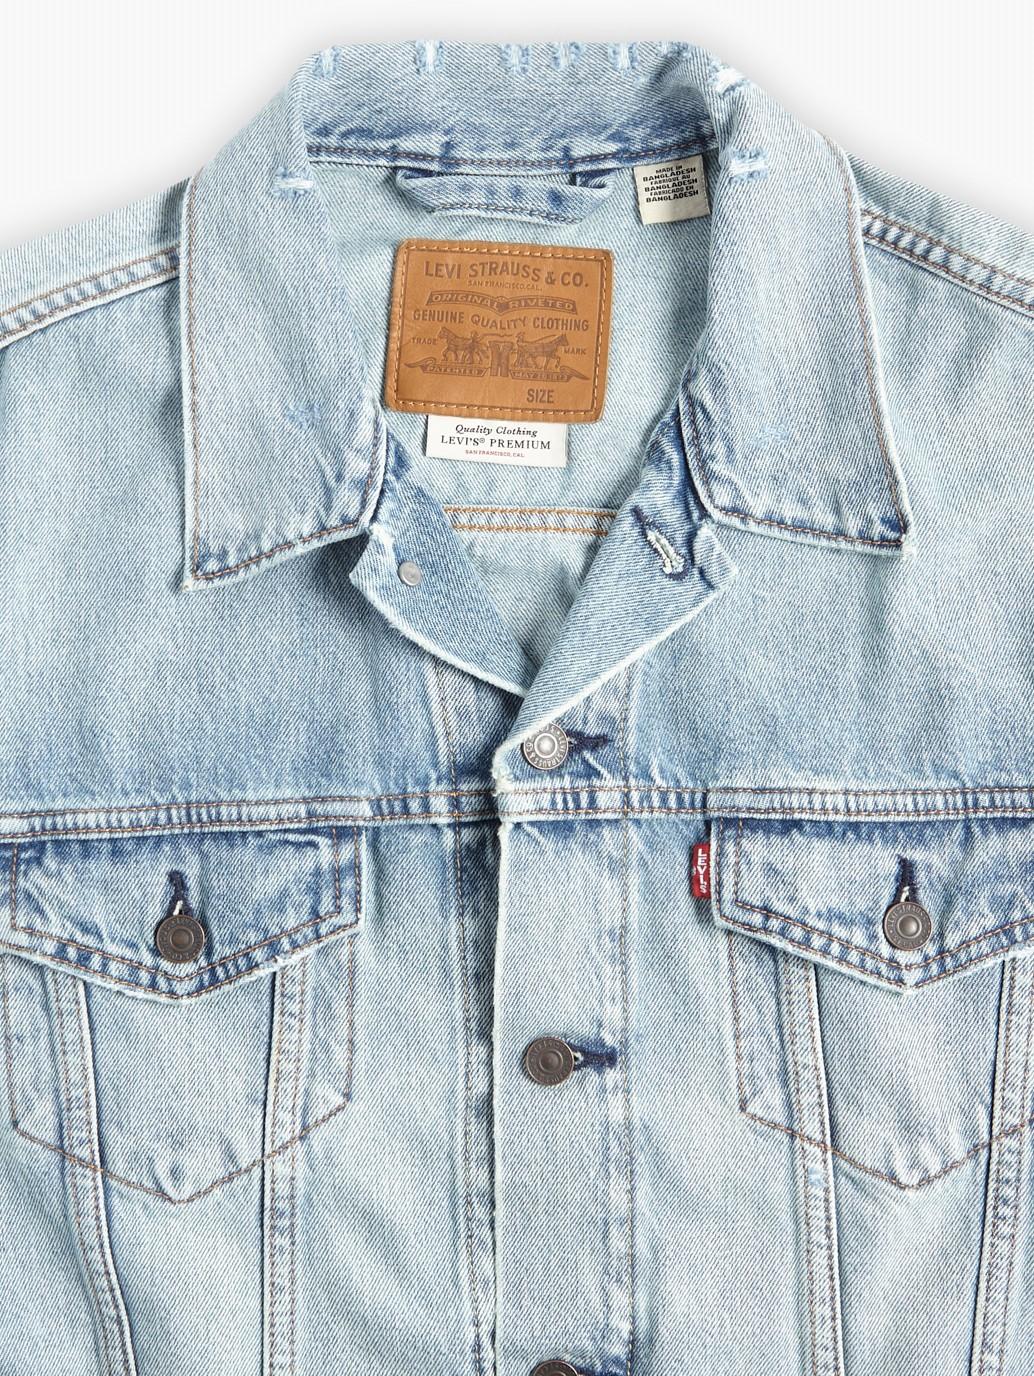 Buy Levi's® Men's Relaxed Fit Trucker Jacket| Levi's® Official Online ...